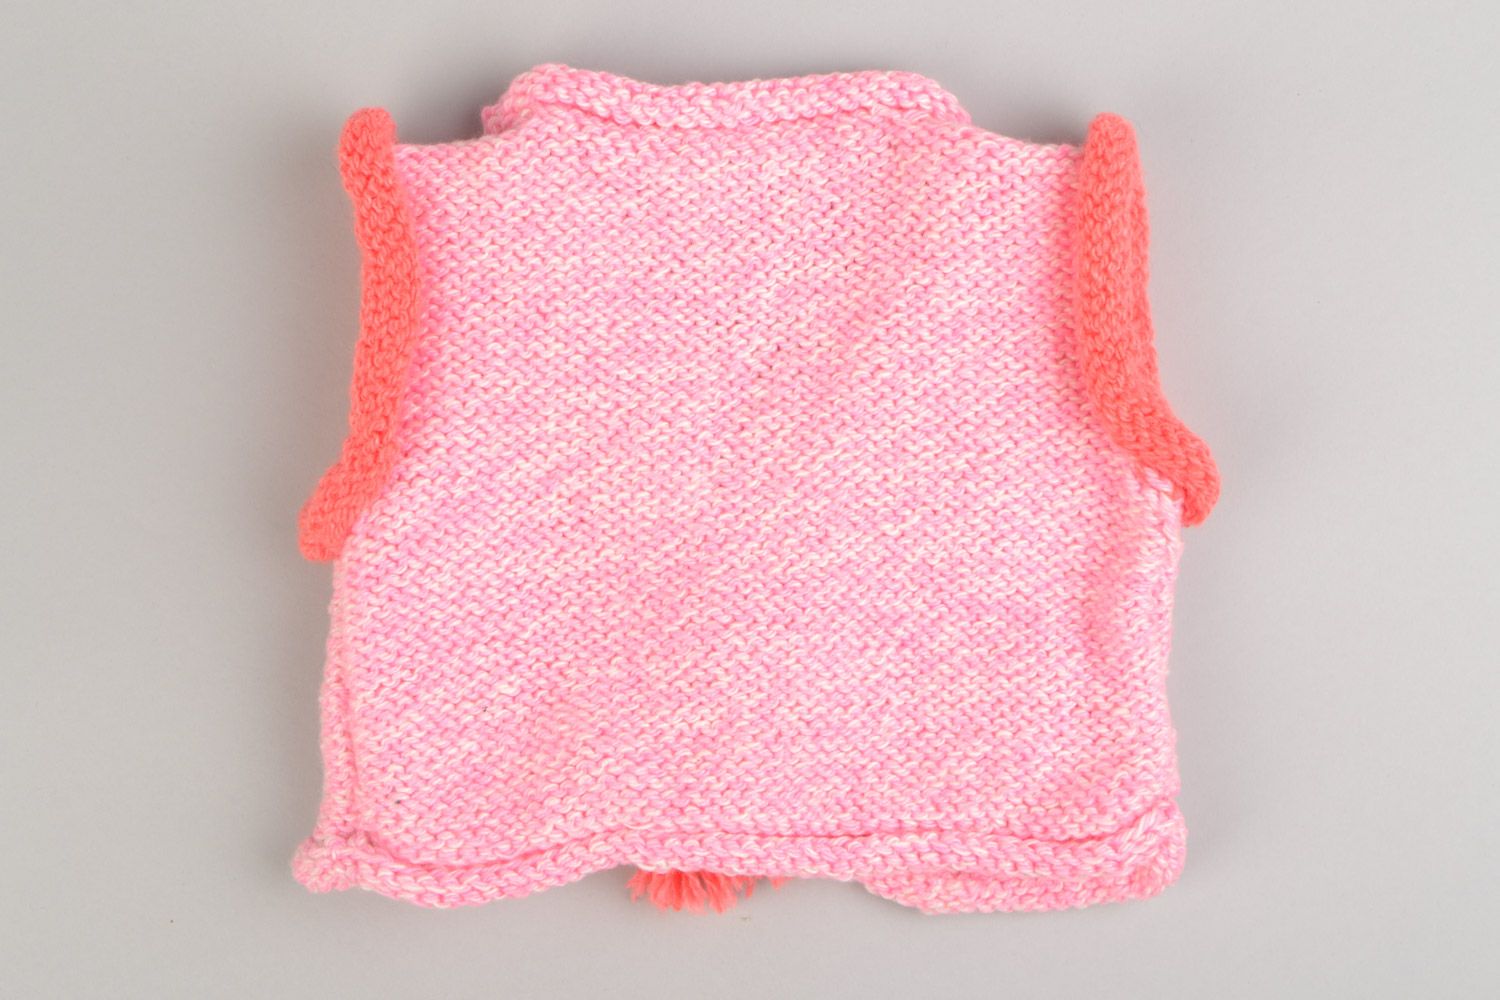 Handmade knitted vest for baby in pink color made of acrylic yarns with tassels photo 4